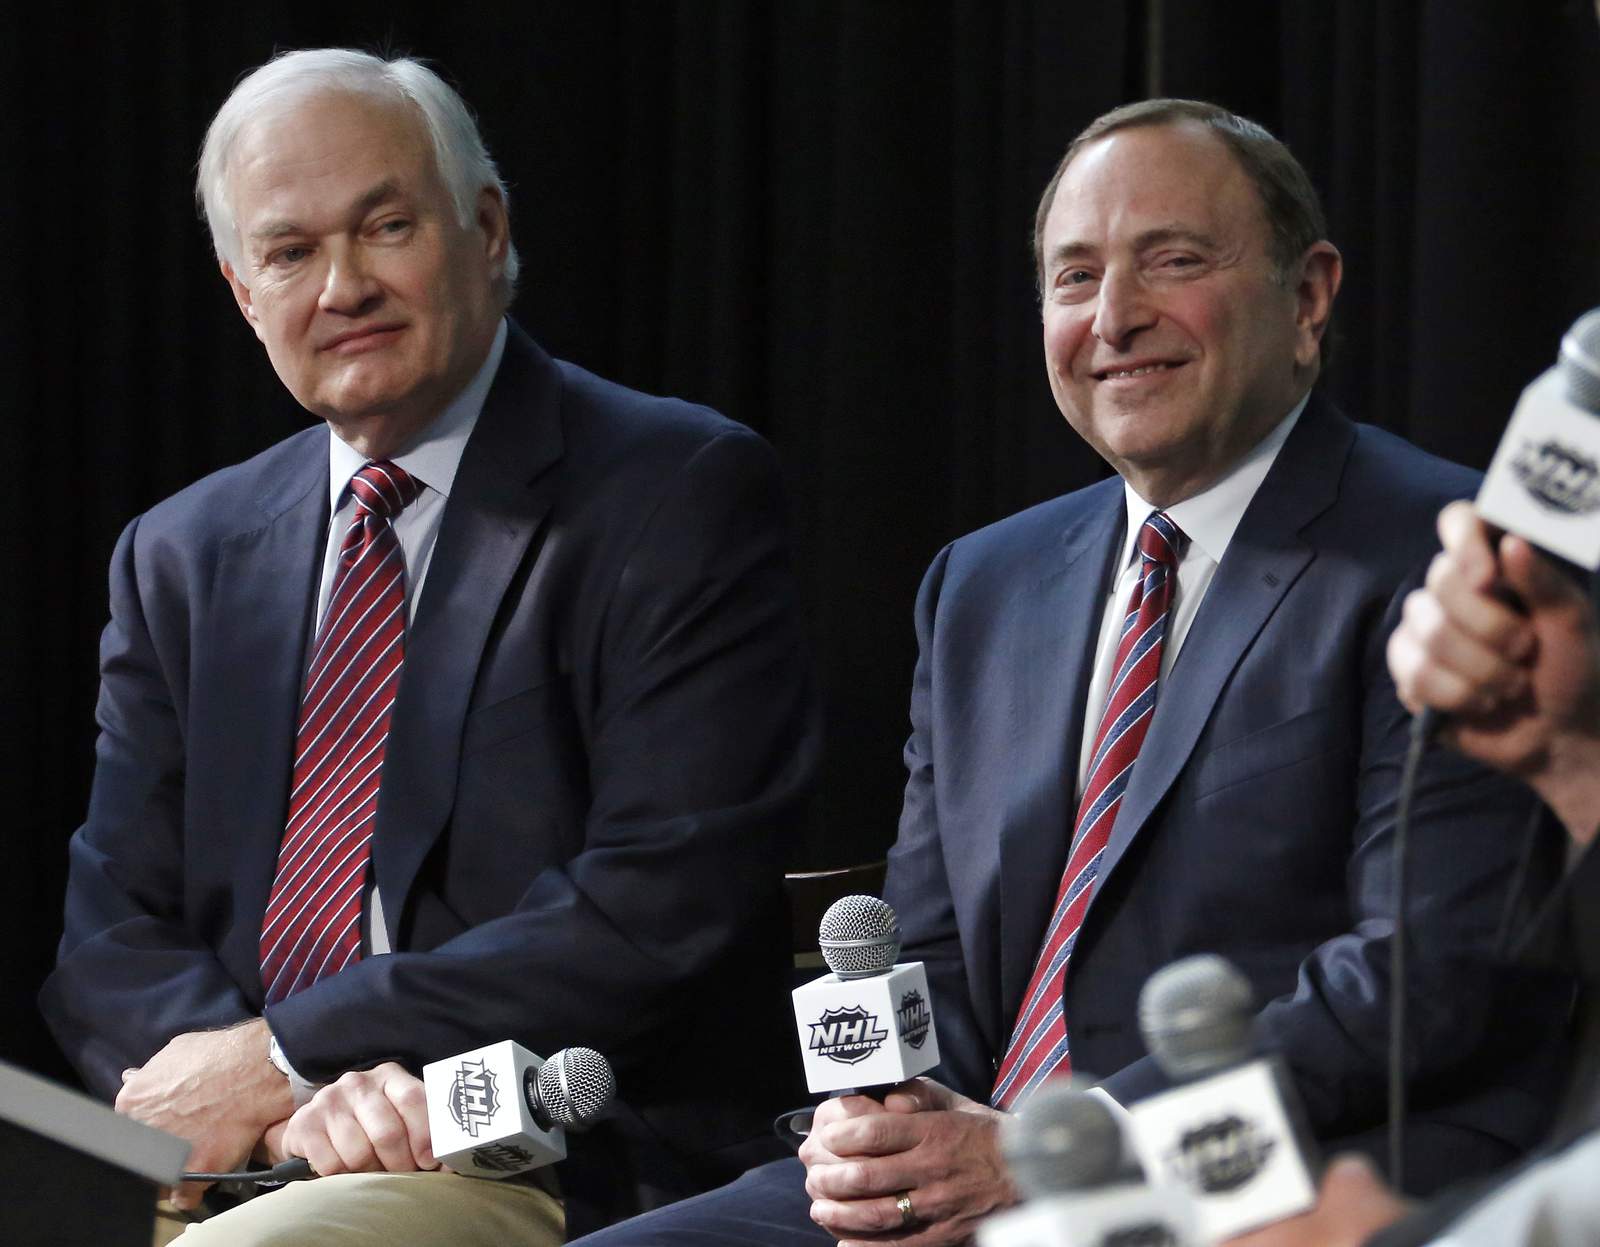 NHL, players take collaborative approach in bid to resume